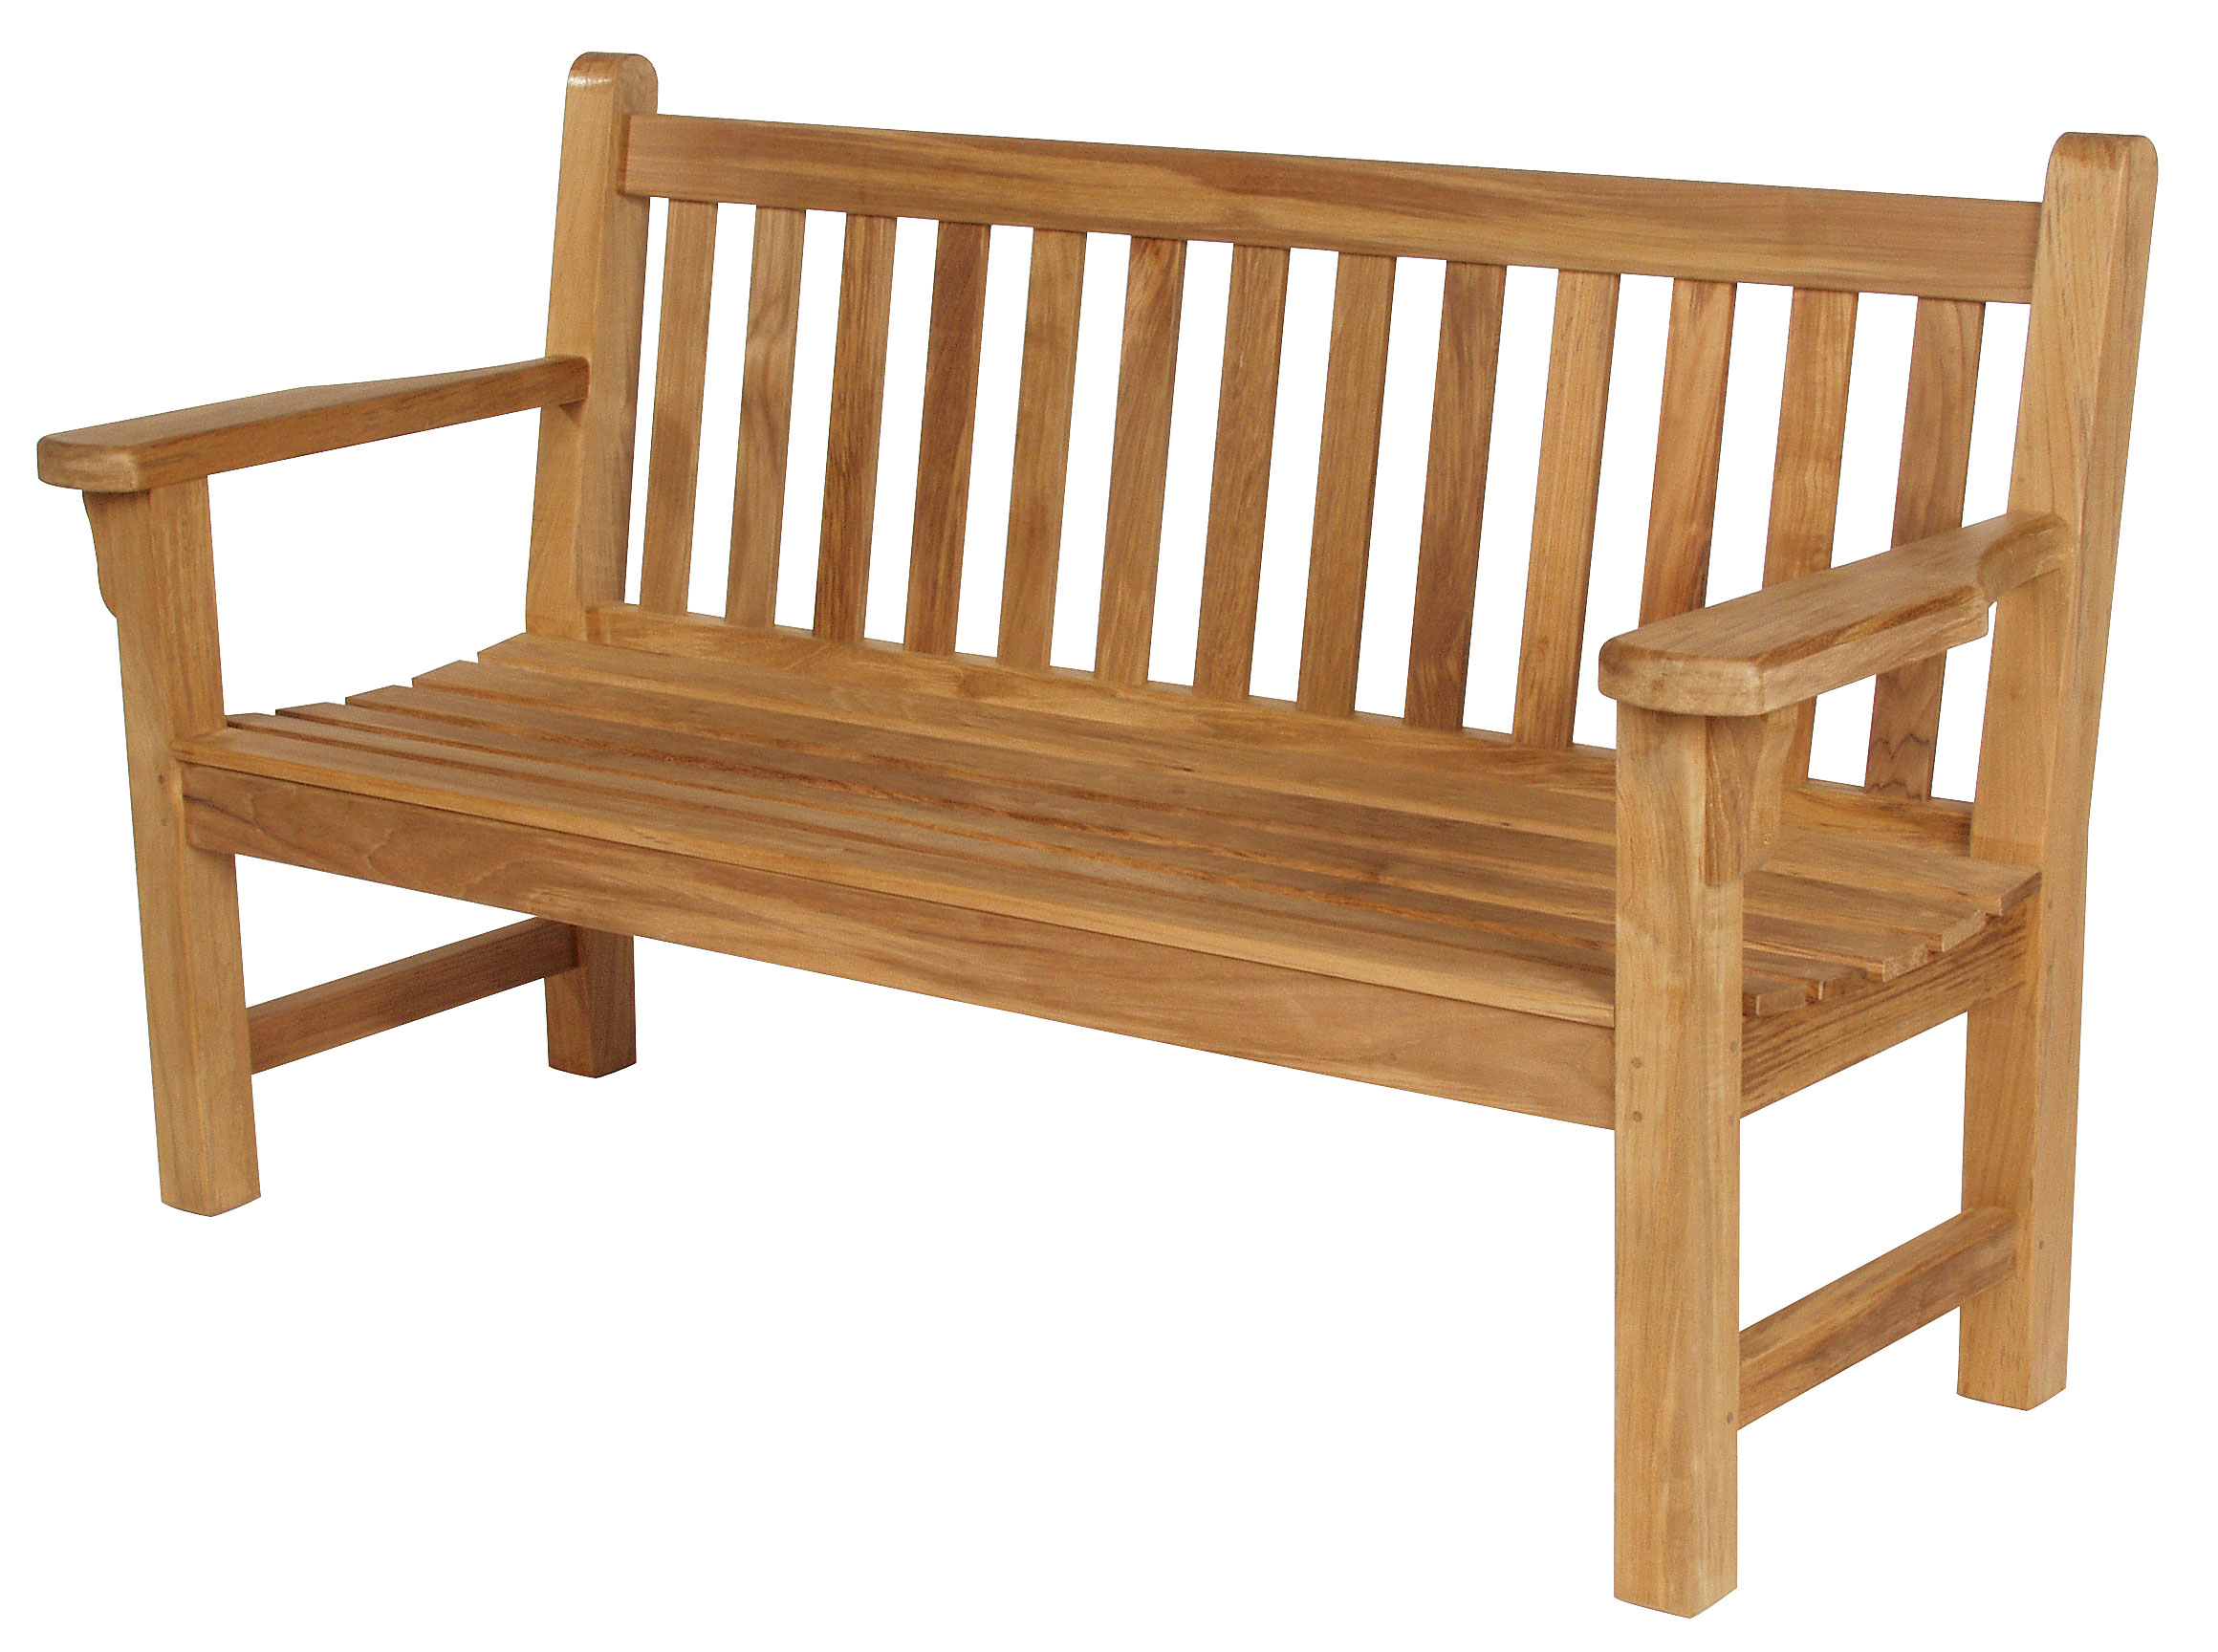 Barlow Tyrie London Garden Bench 150cm (Excluding Cushion)